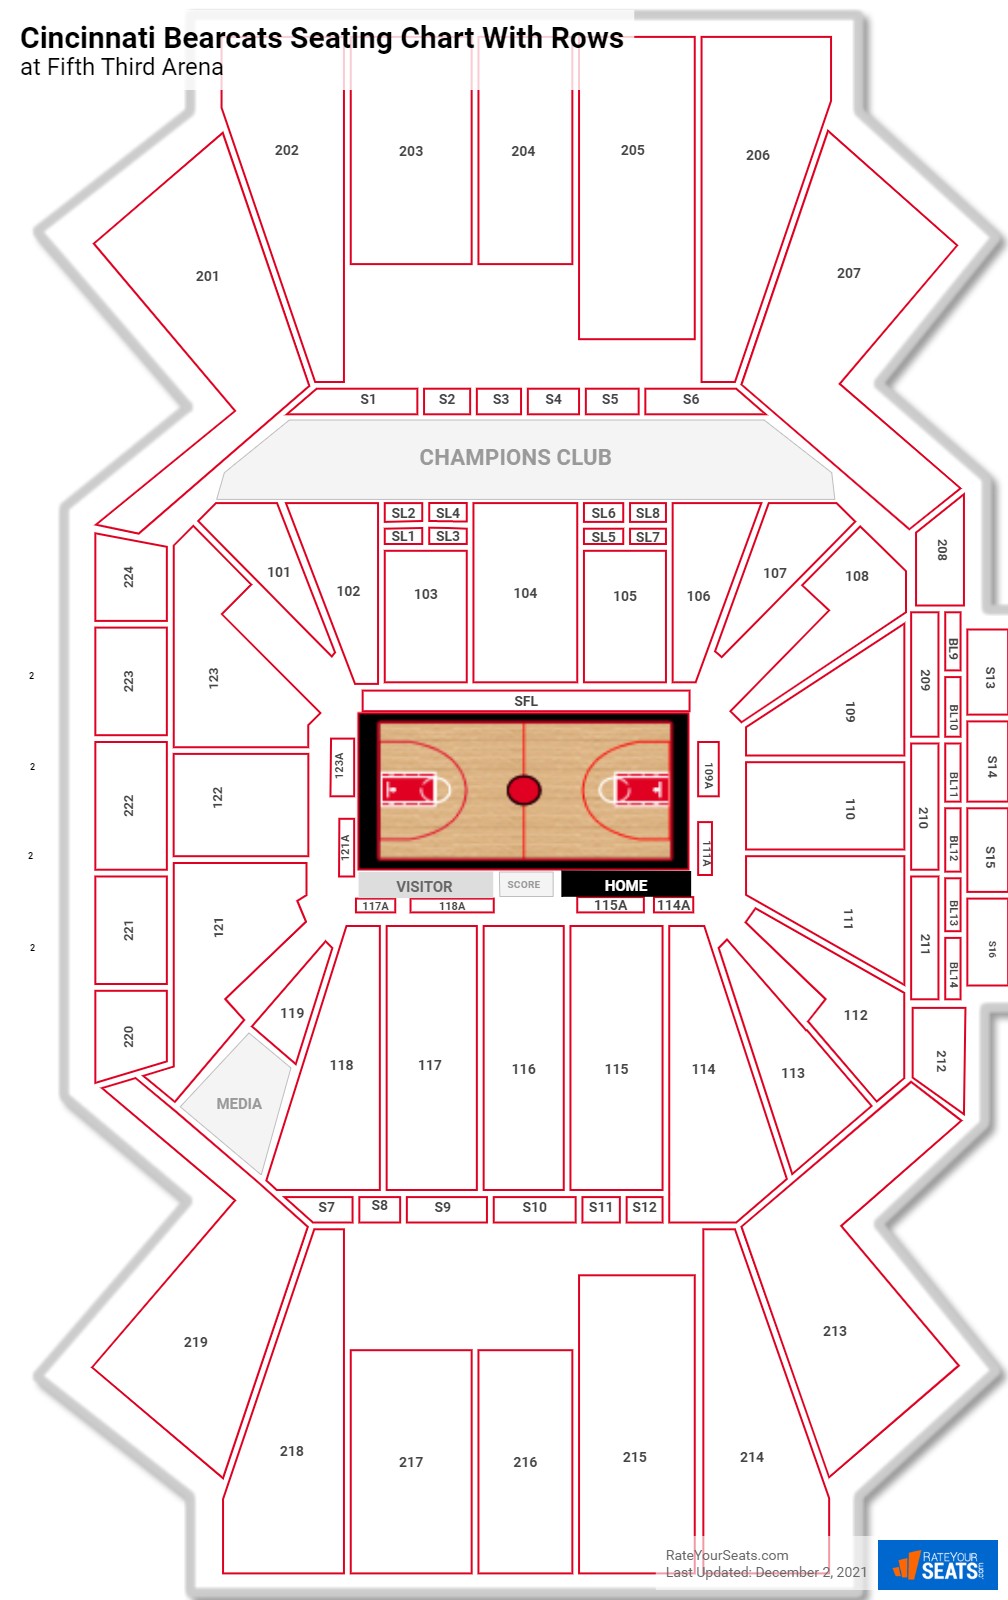 Fifth Third Arena seating chart with row numbers